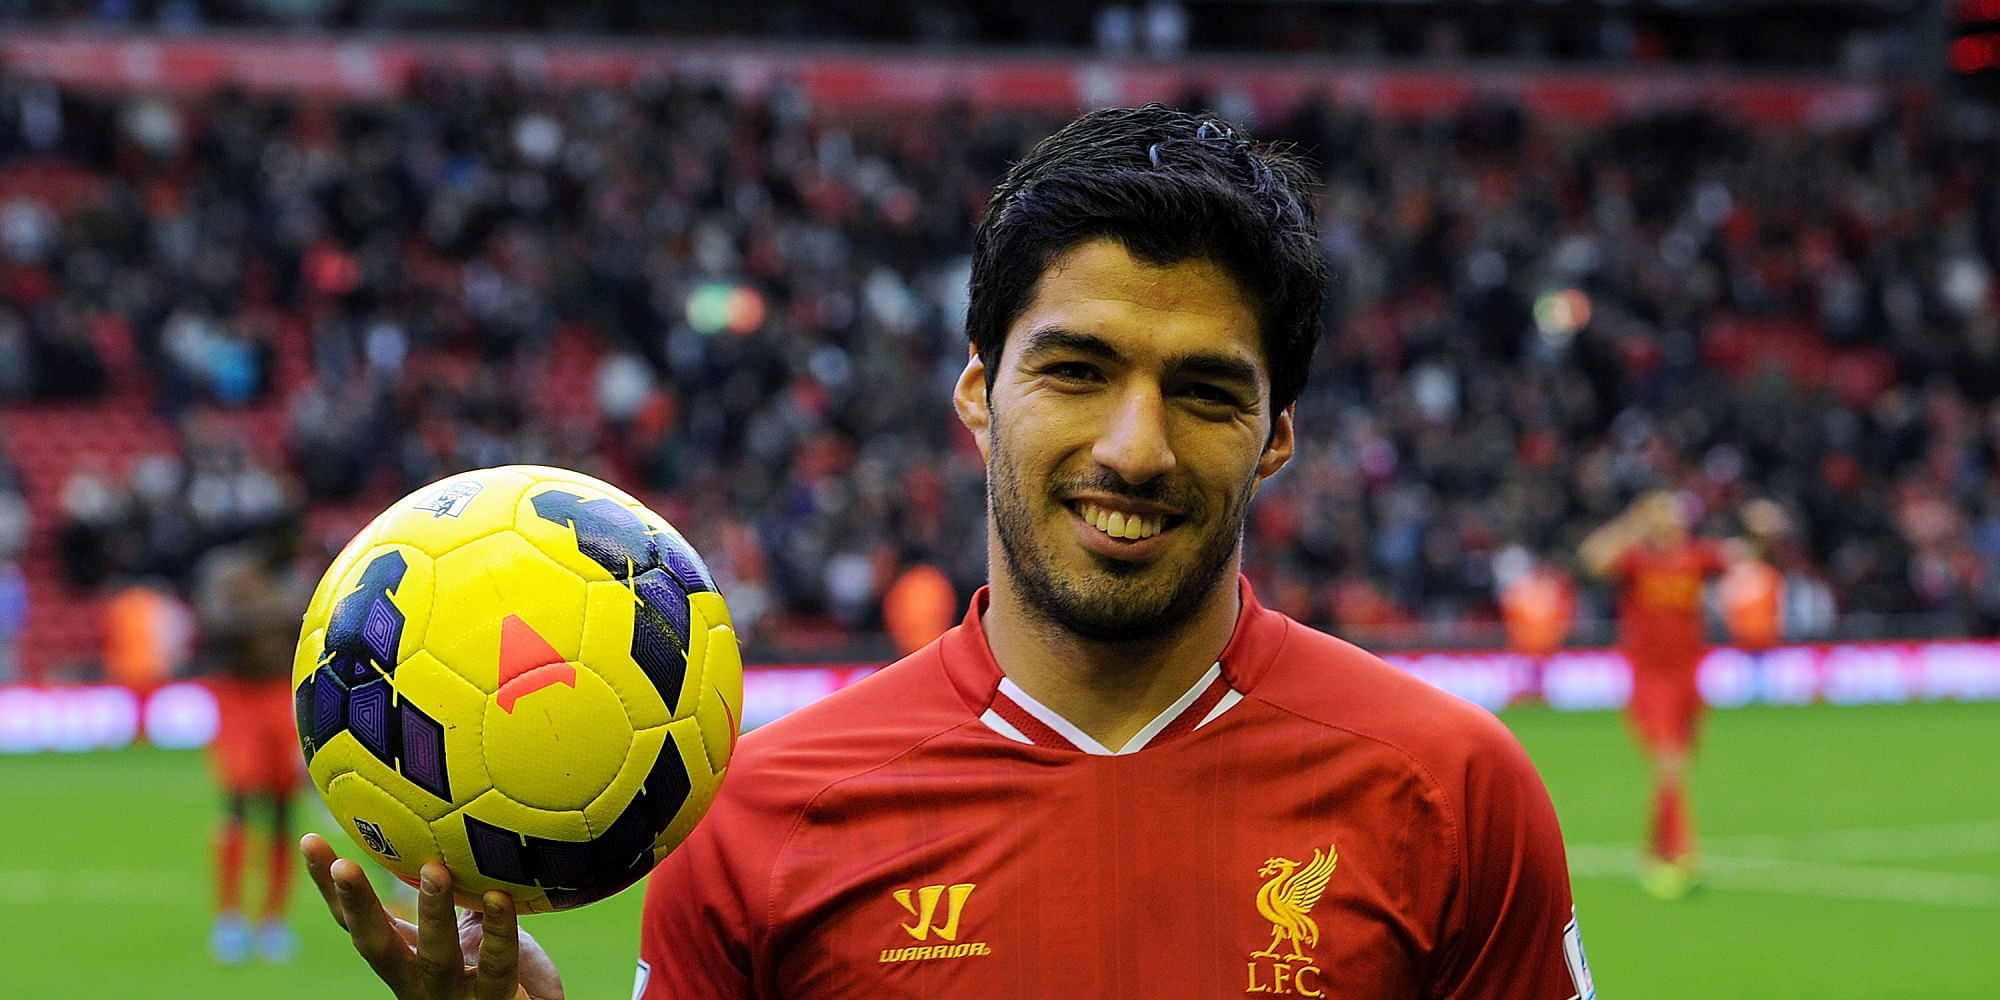 7 facts you didn't know about Luis Suarez - Slide 7 of 72000 x 1000